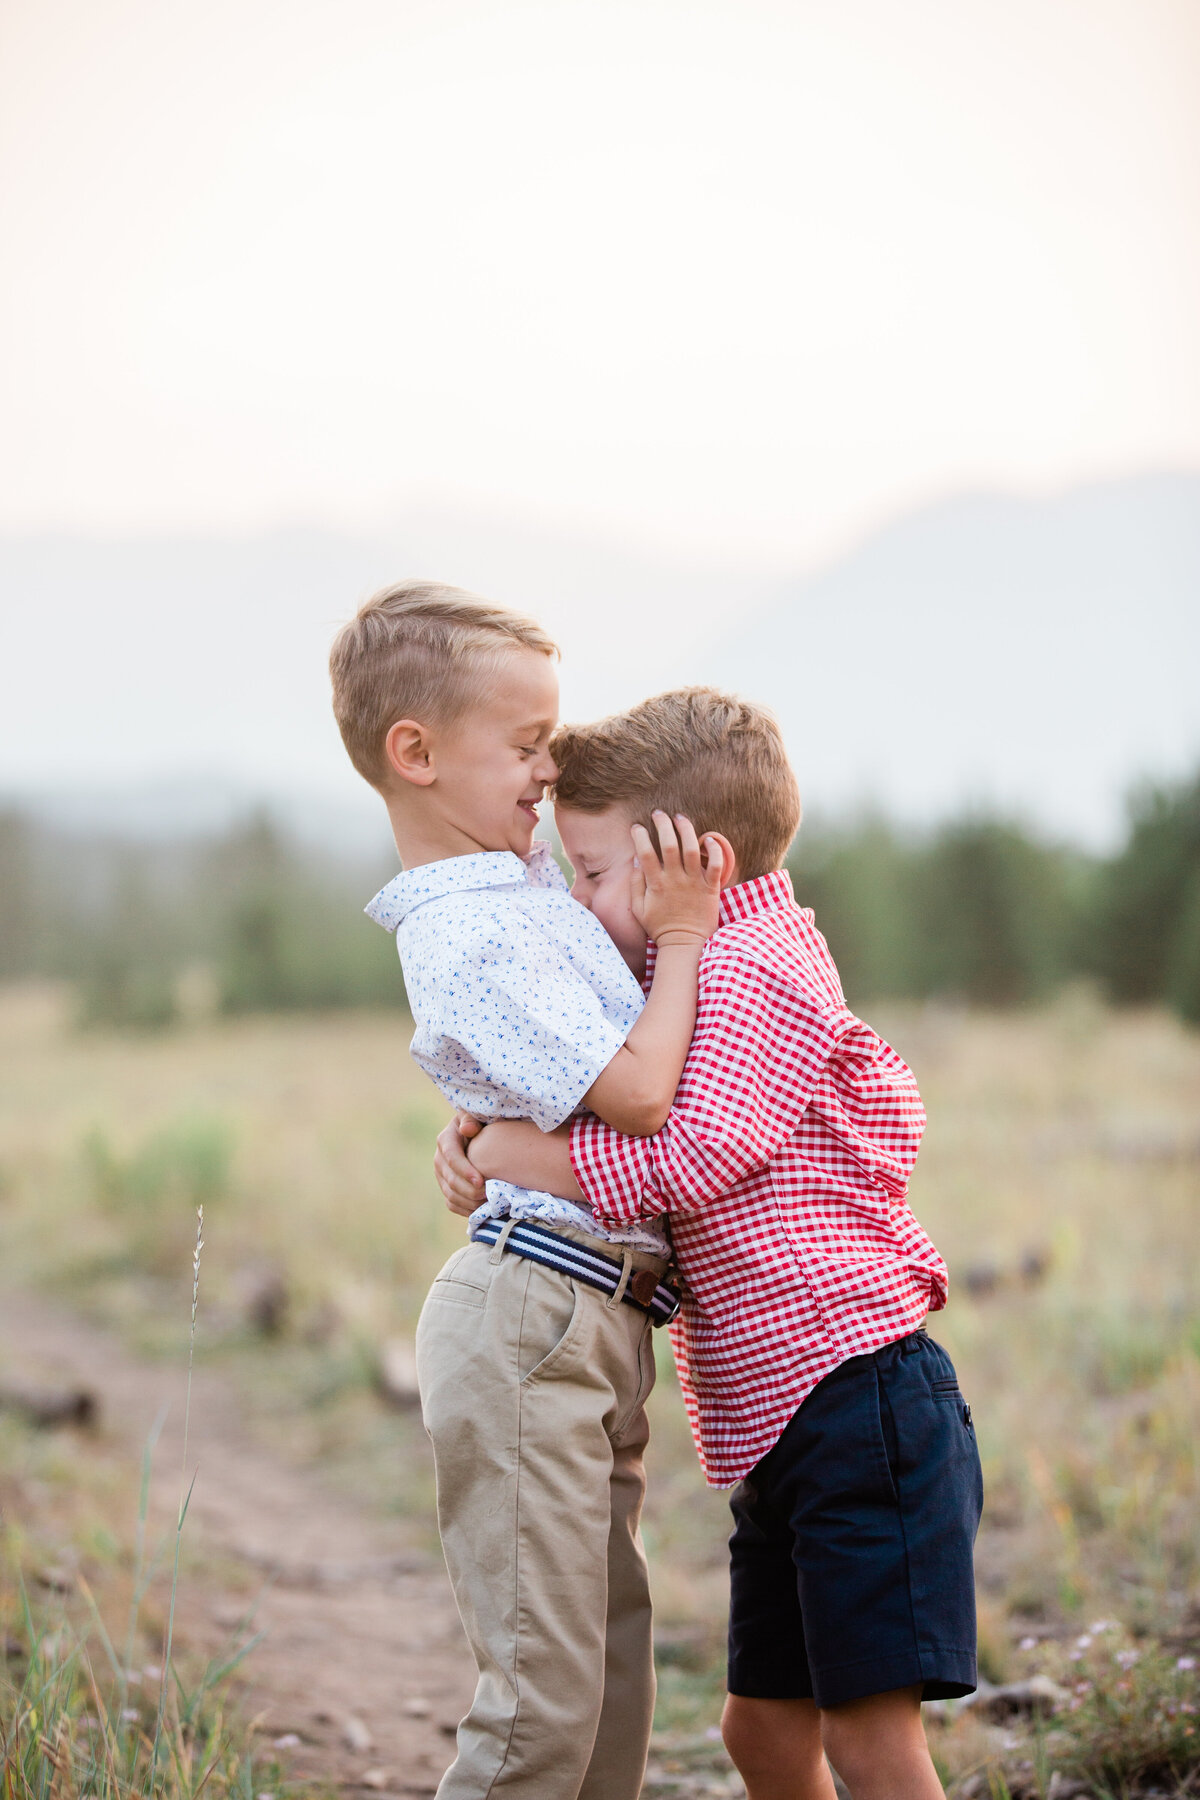 Two young brother are hugging tightly and laughing. They are in a grassy mountain field